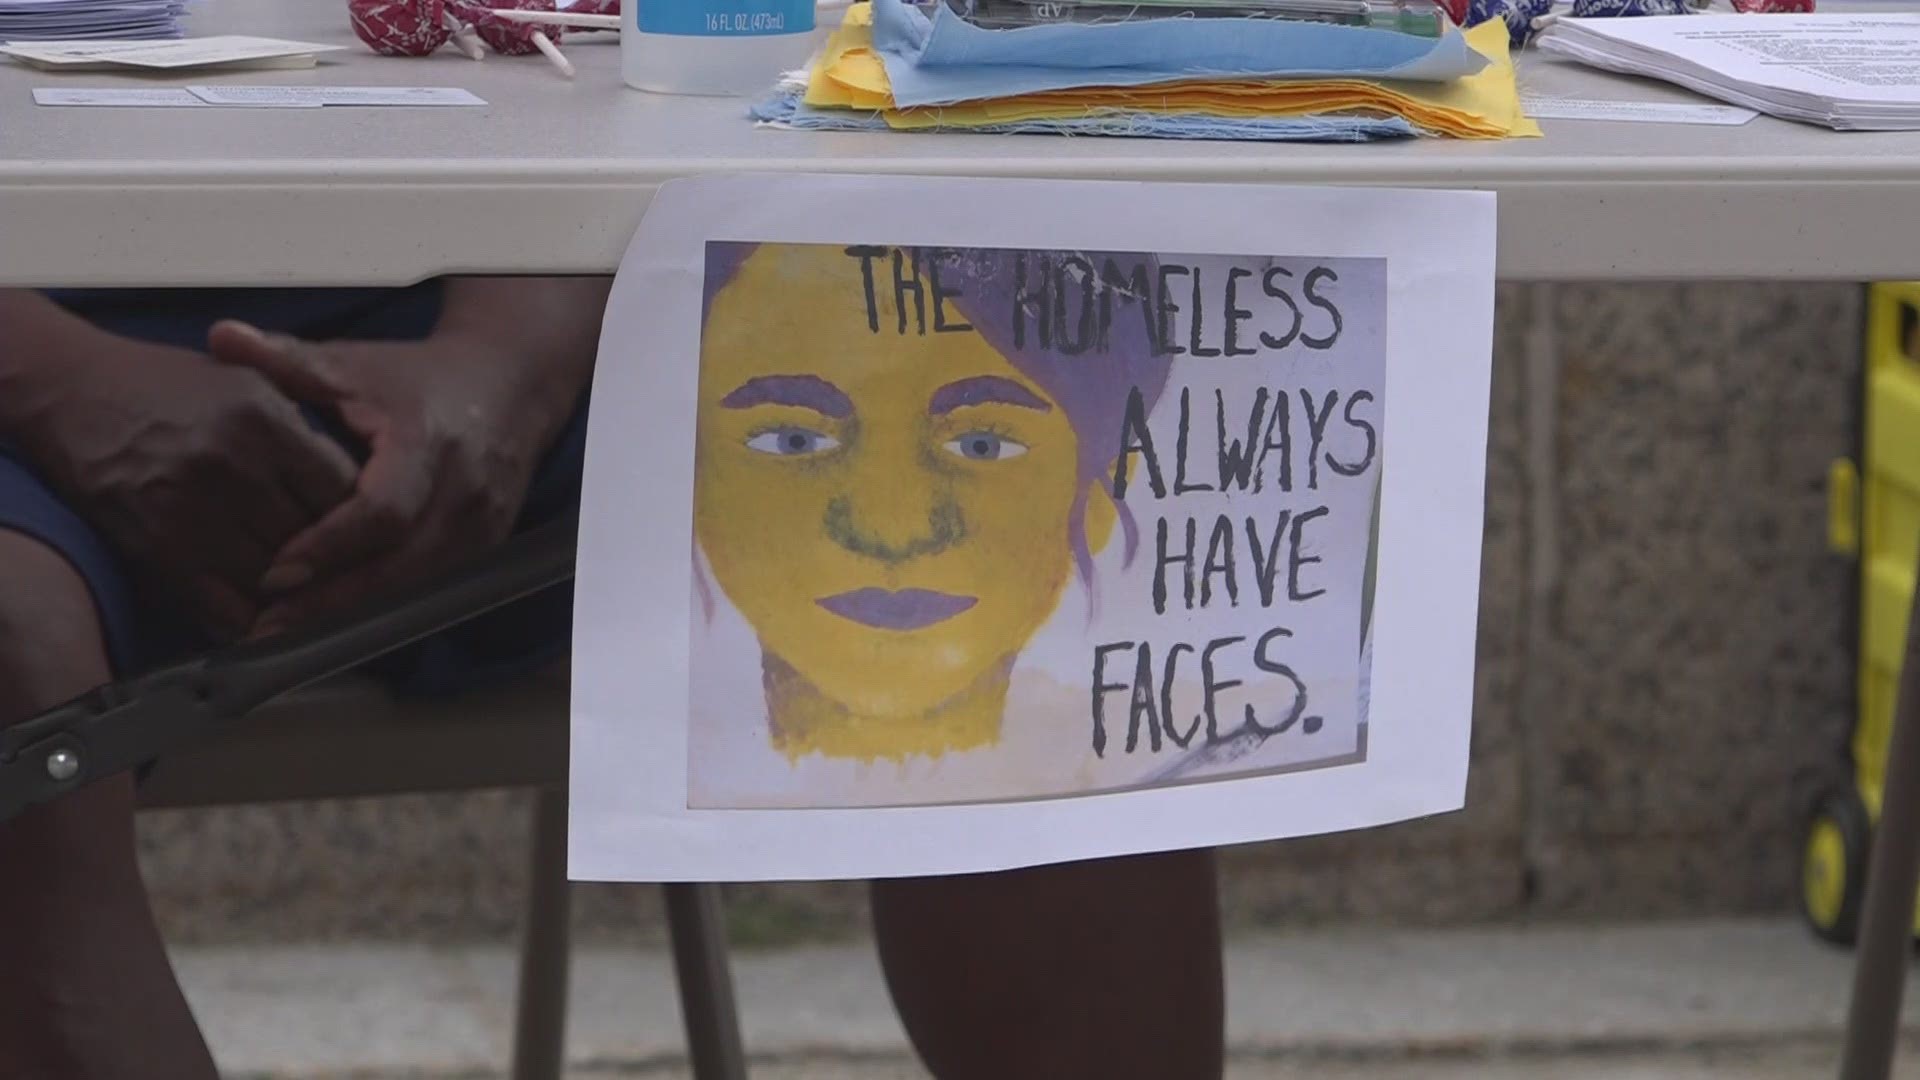 Advocates with the organization "Homeless Voices for Justice" held their annual event on Tuesday to raise awareness about homeless populations nationwide.